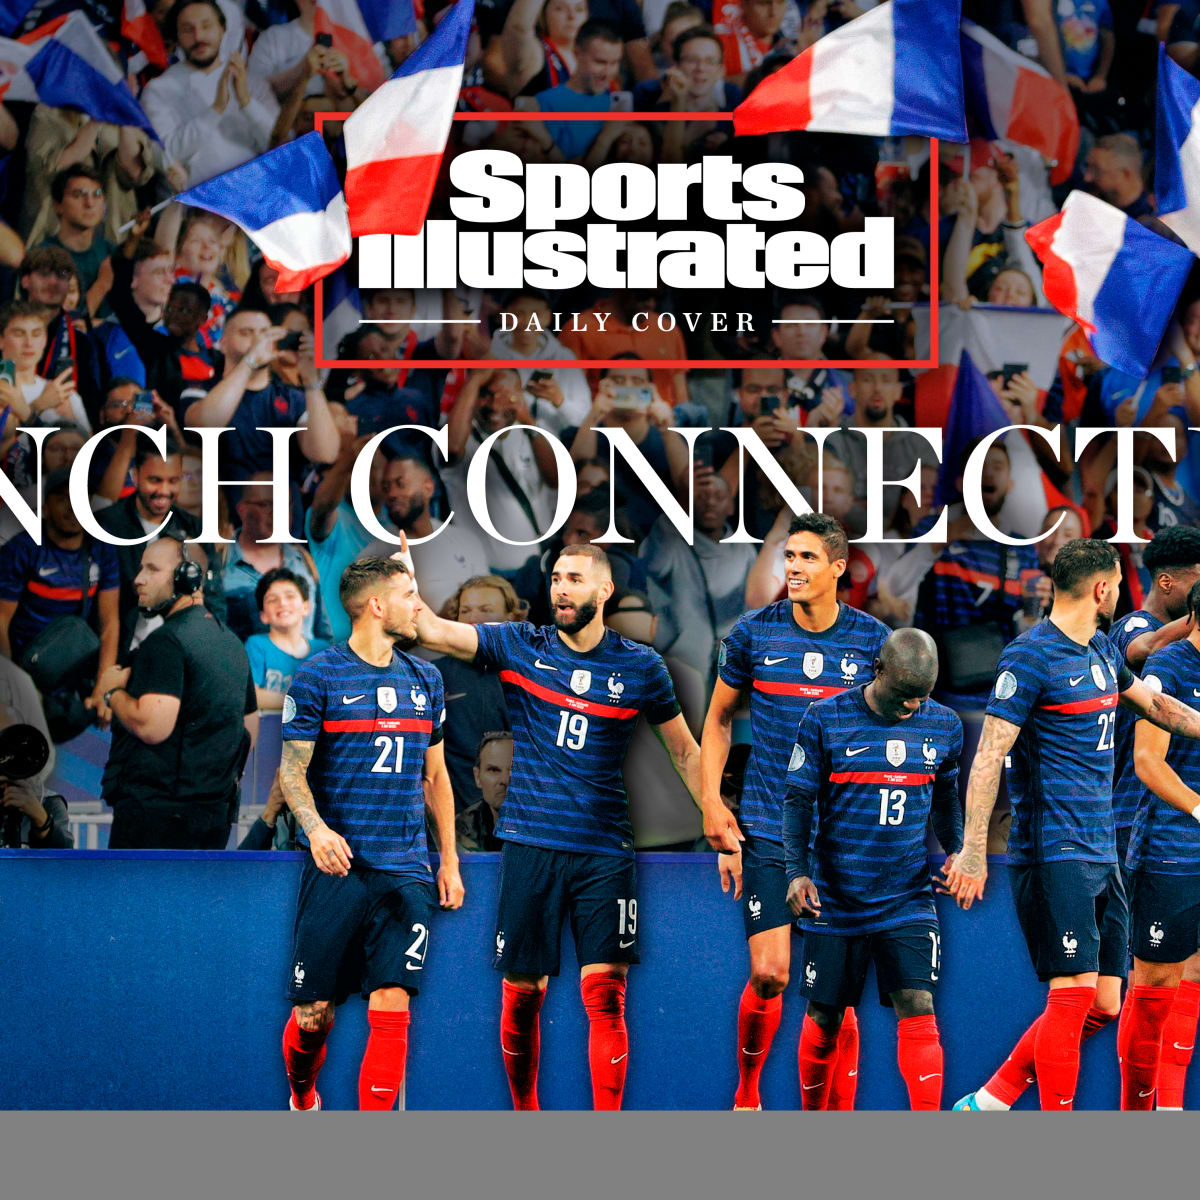 When France plays at a World Cup, its diversity goes under a microscope -  Sports Illustrated